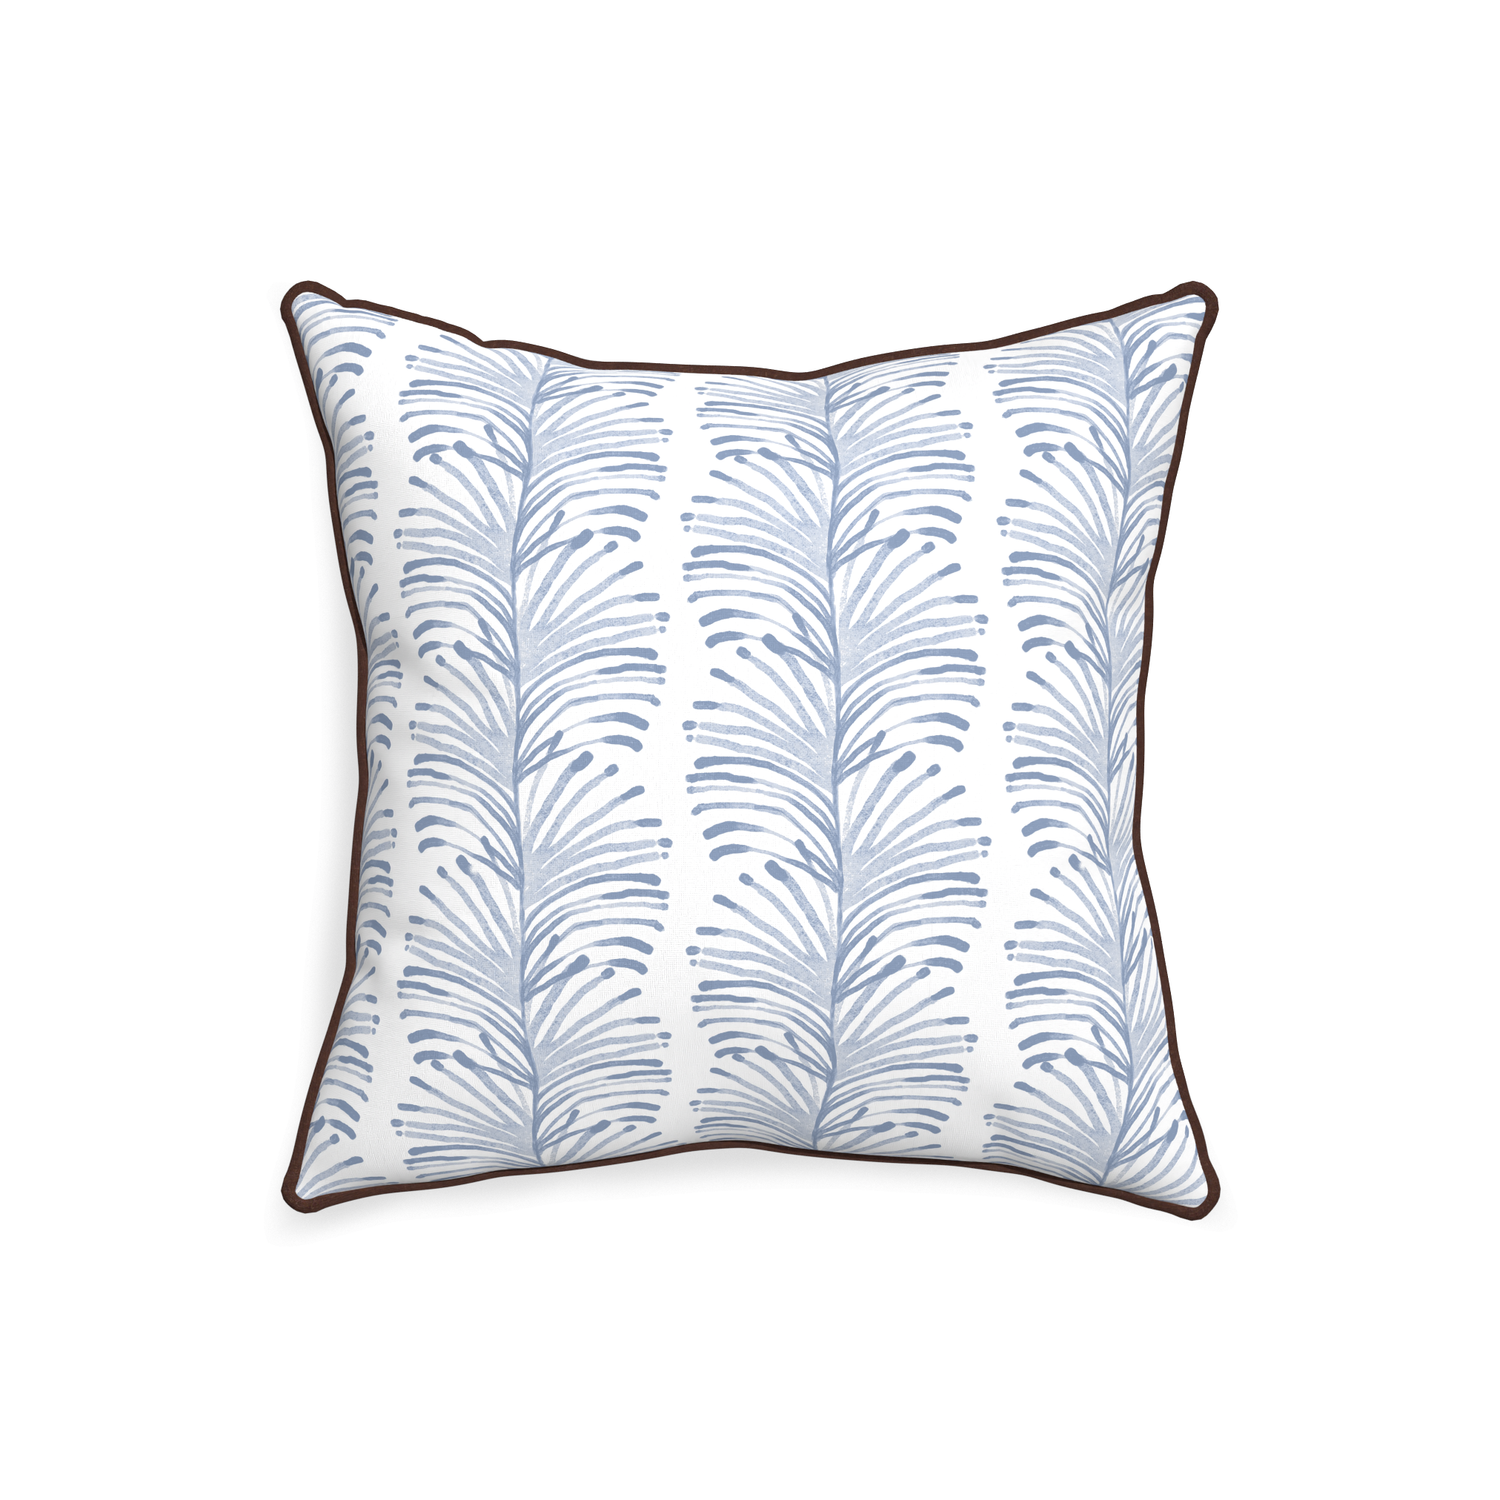 20-square emma sky custom sky blue botanical stripepillow with w piping on white background